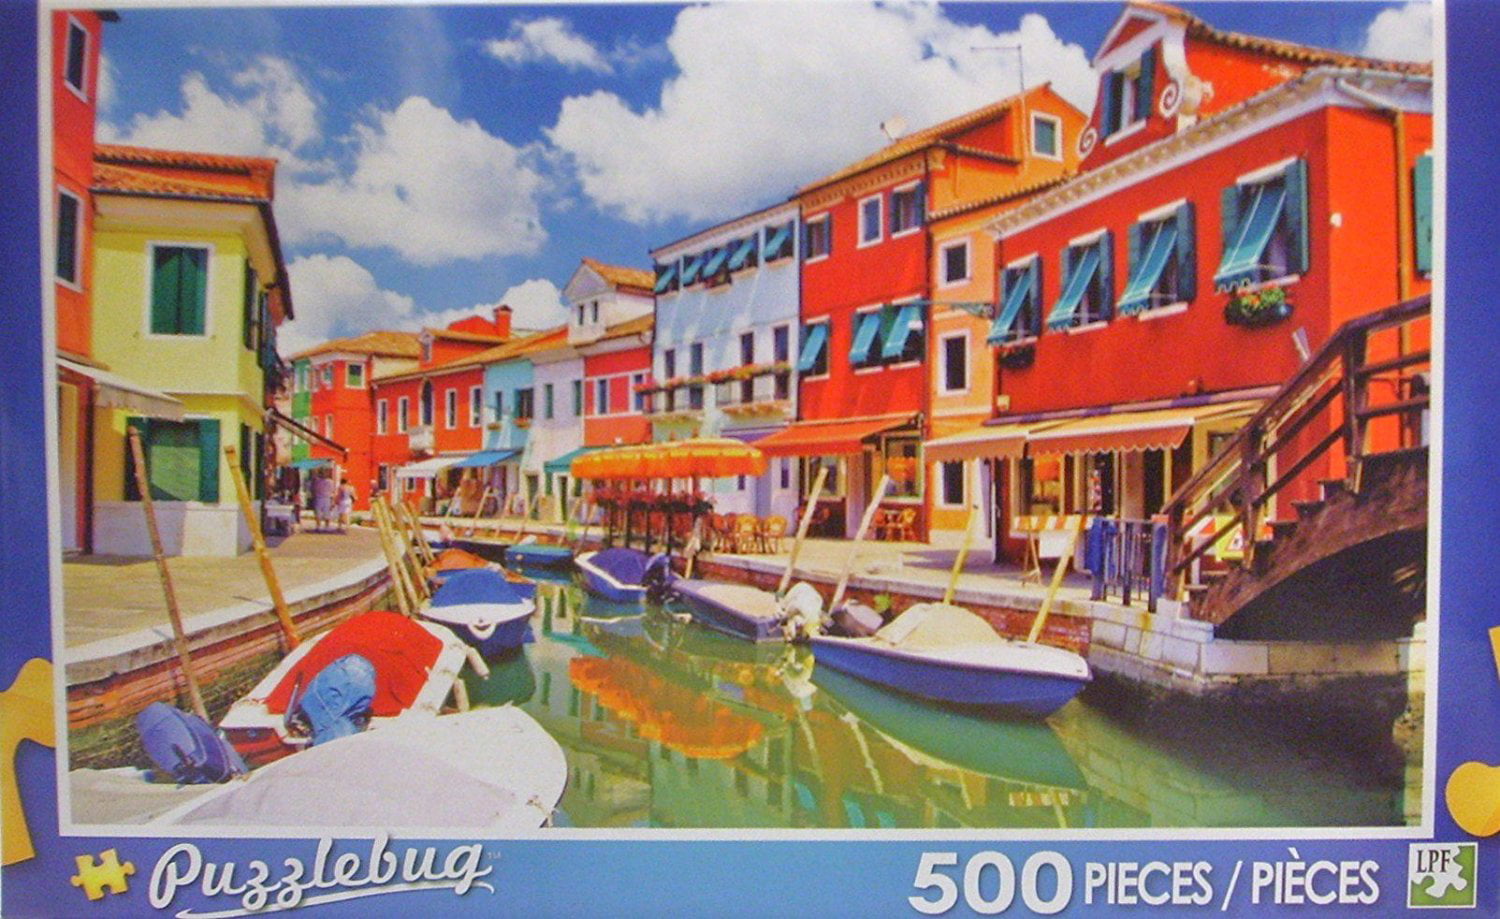 NEW Puzzlebug 500 Piece Jigsaw Puzzle ~ Vibrant Houses Along Boat Canal 